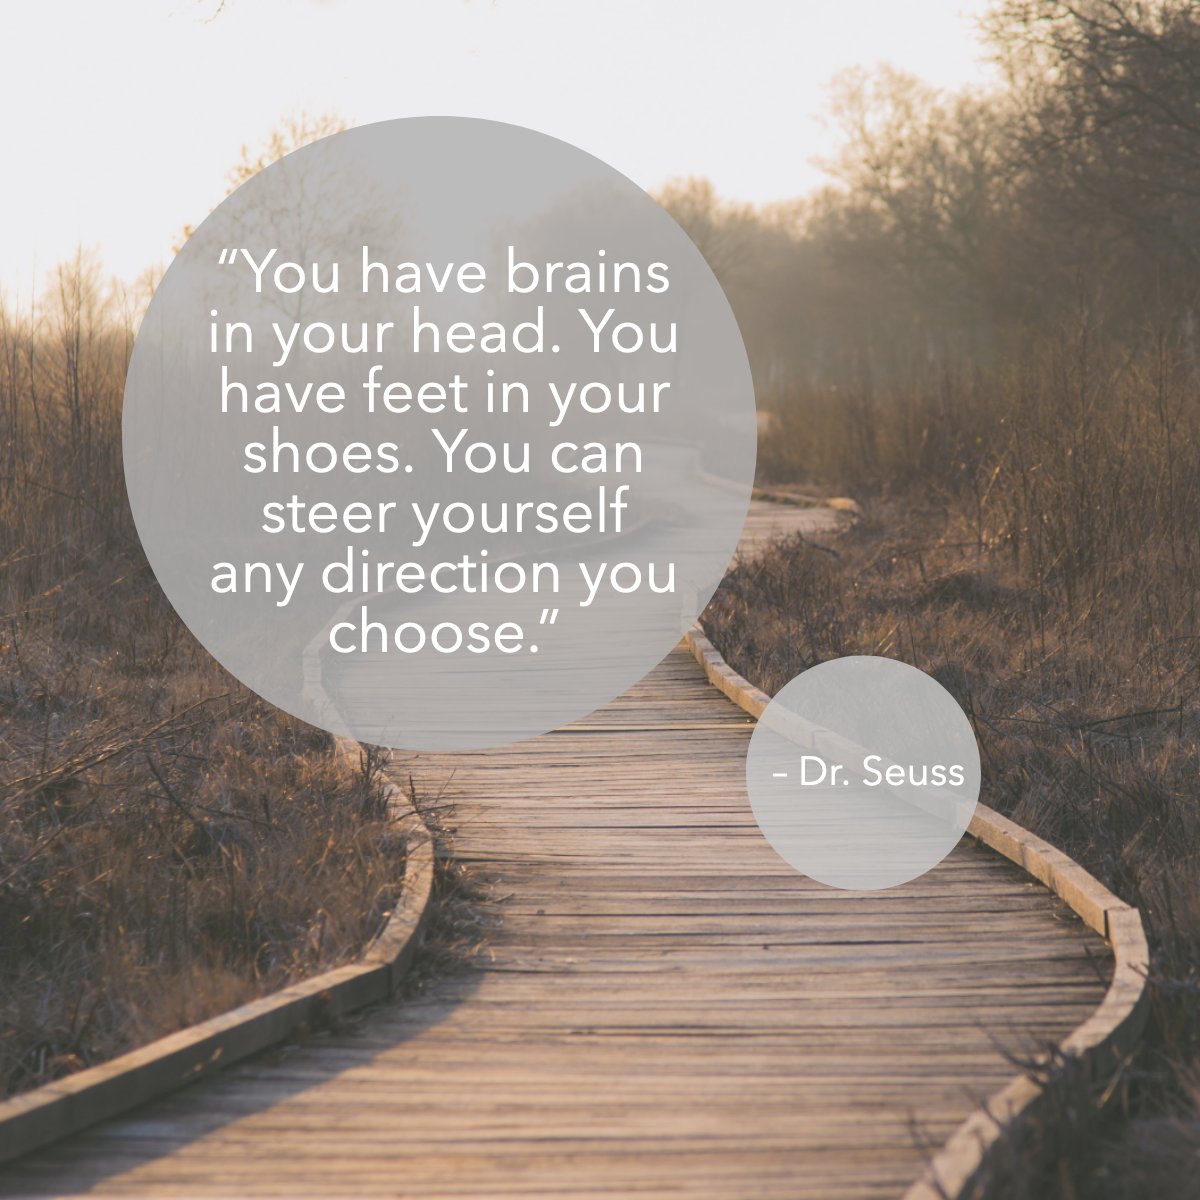 ...You can steer yourself in any direction you choose.- Dr. Seuss

#Drseuss #Path #Inspirational #Inspiring #Quote
#Walkaway
 #RacingRealEstateAgent #BarrettRealEstate #StoneTreeRealEstateTeam #maricopaazrealestate #racingagent #arizonarealestate #phoenixrealestateagent